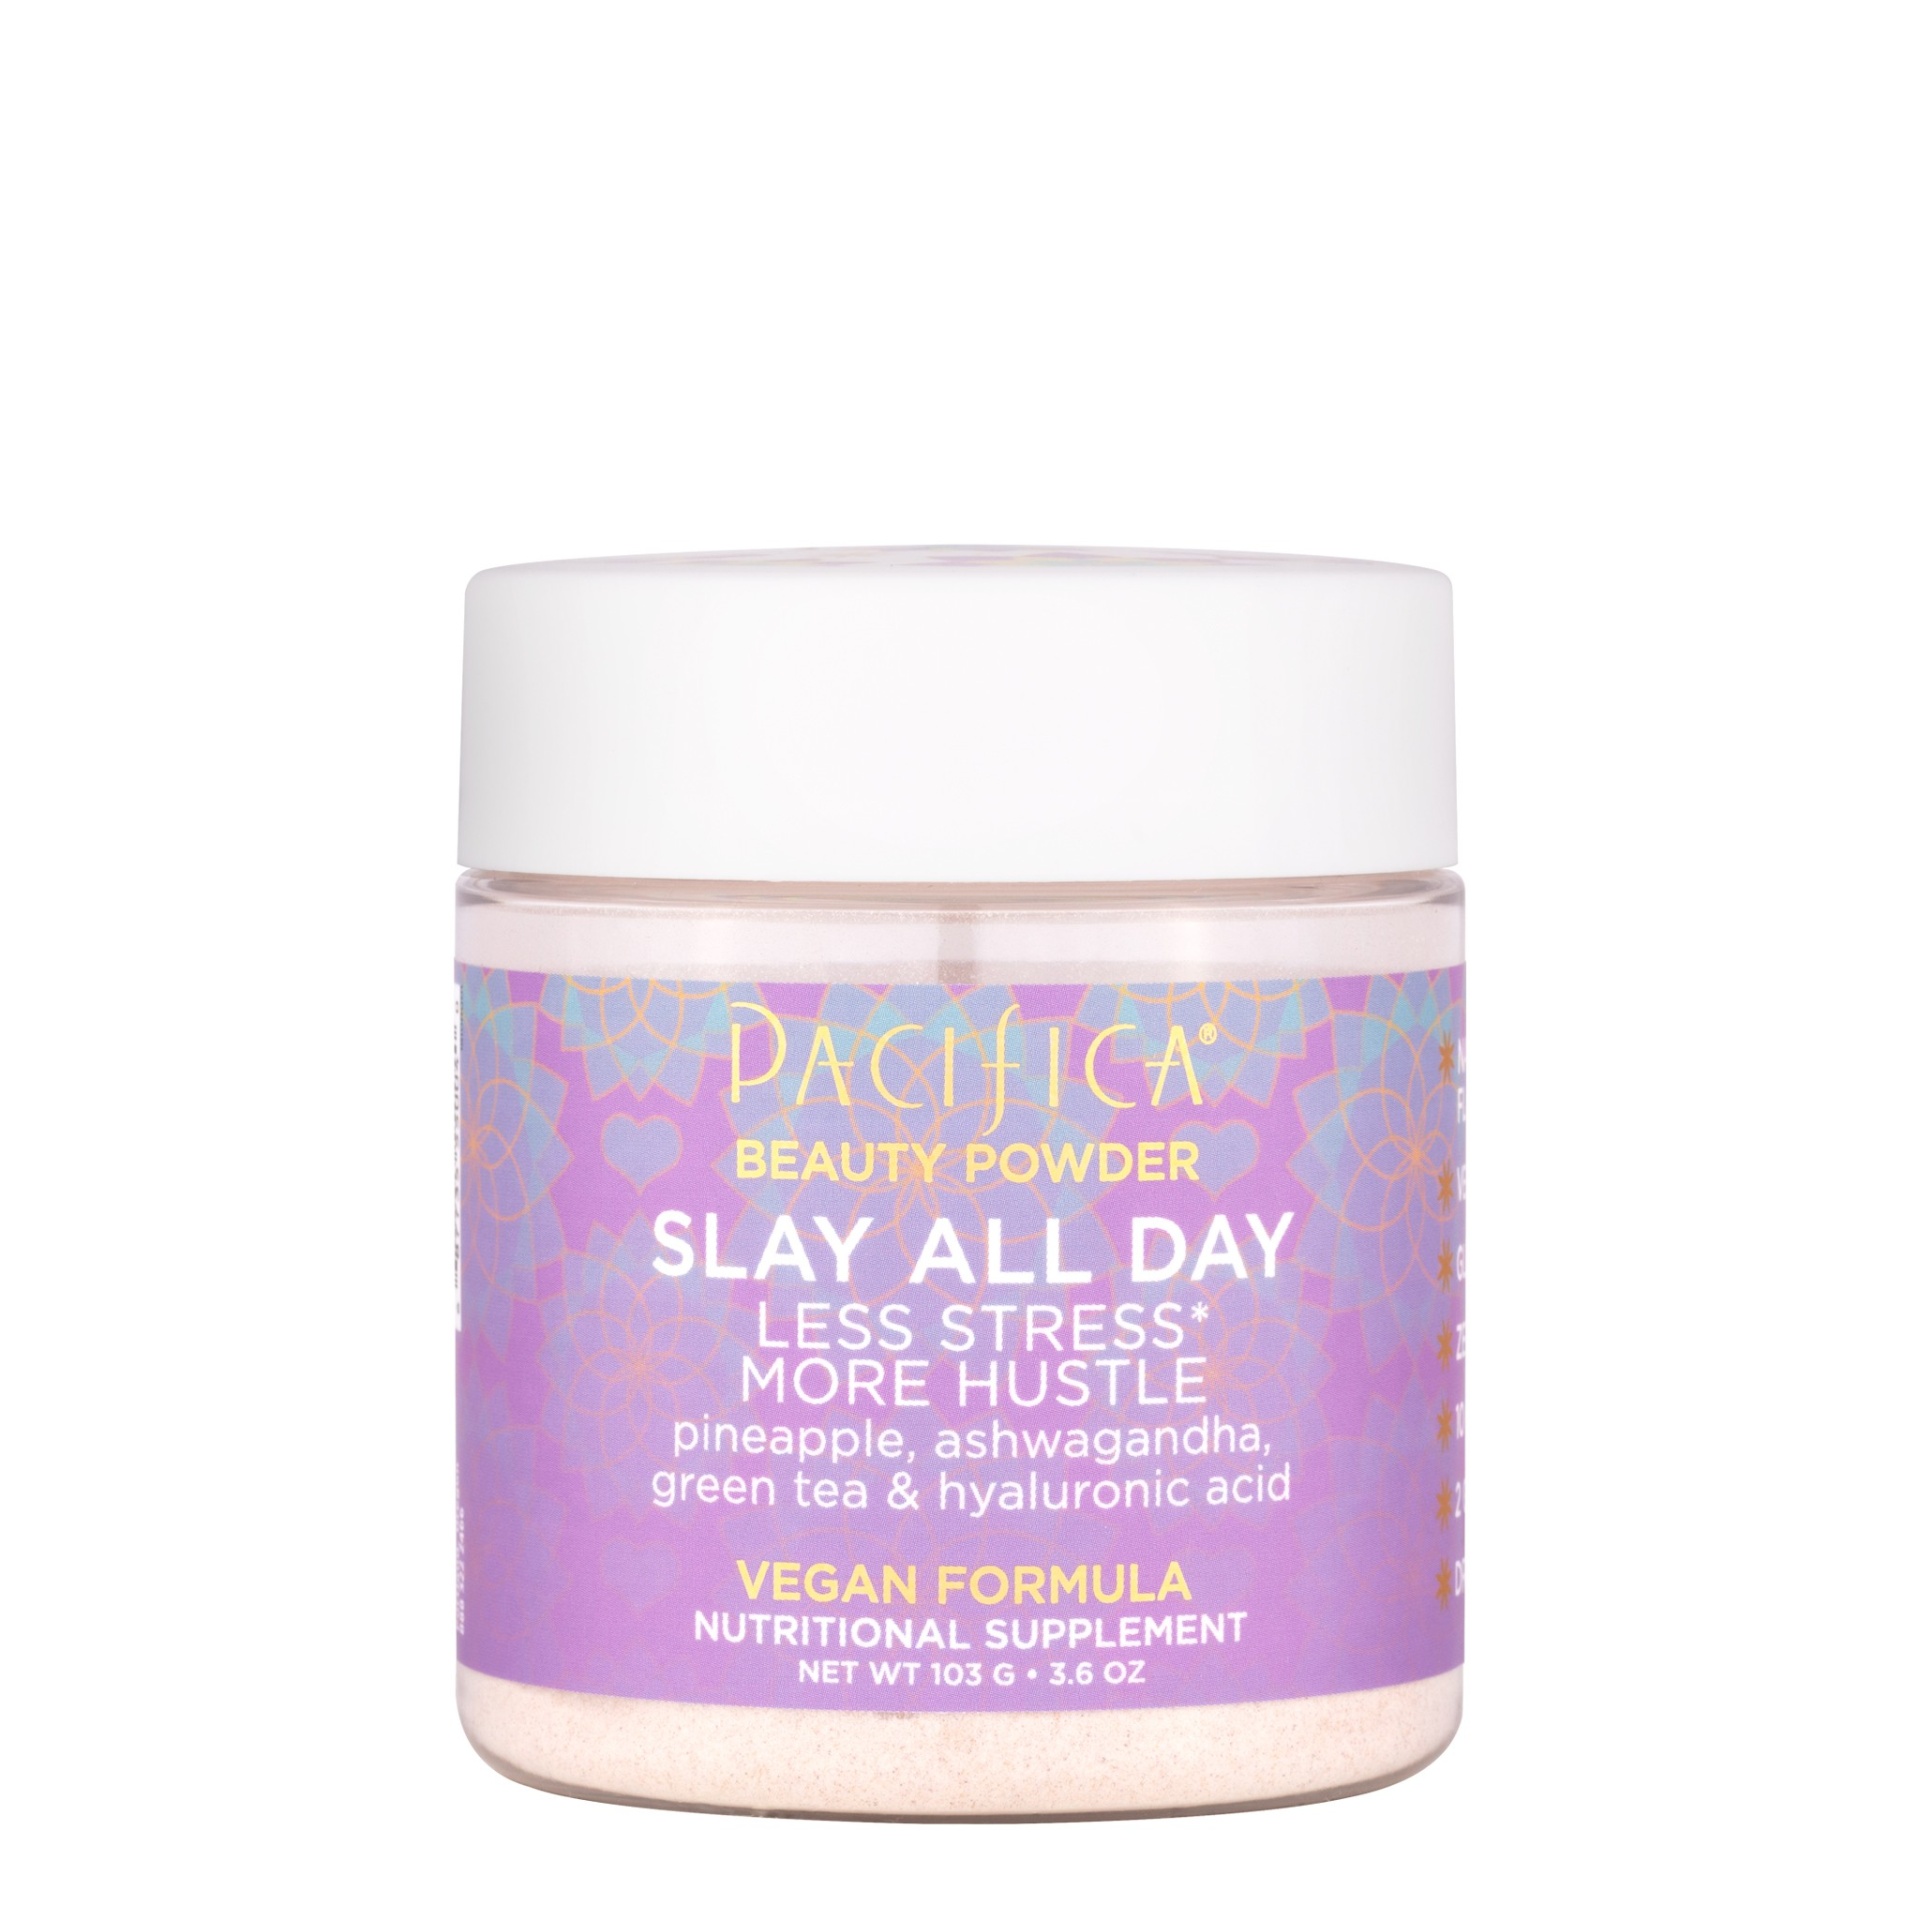 slide 1 of 3, Pacifica Slay All Day Beauty Powder, 3.6 oz